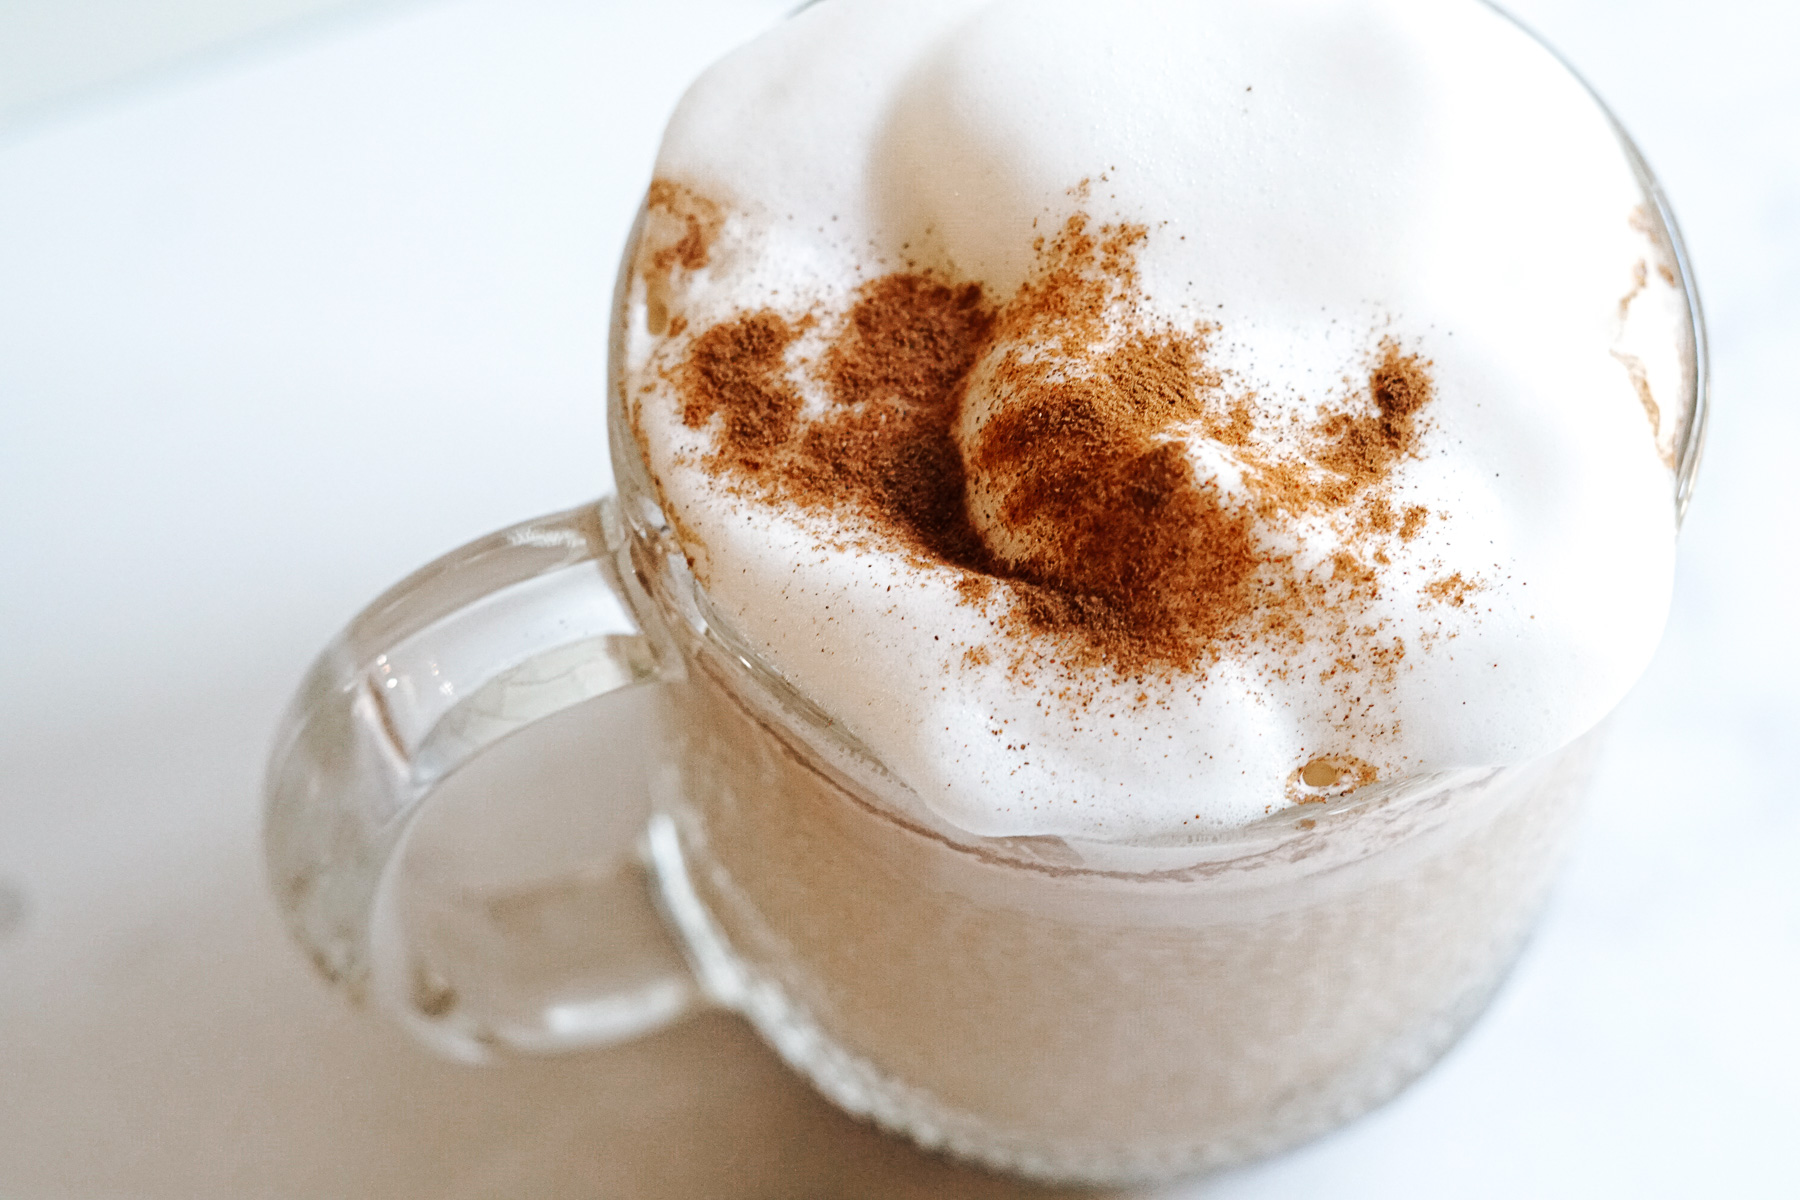 Creamy tan colored coffee drink in clear mug with cold foam and cinnamon on top. Contains coffee, milk and ashwagandha.